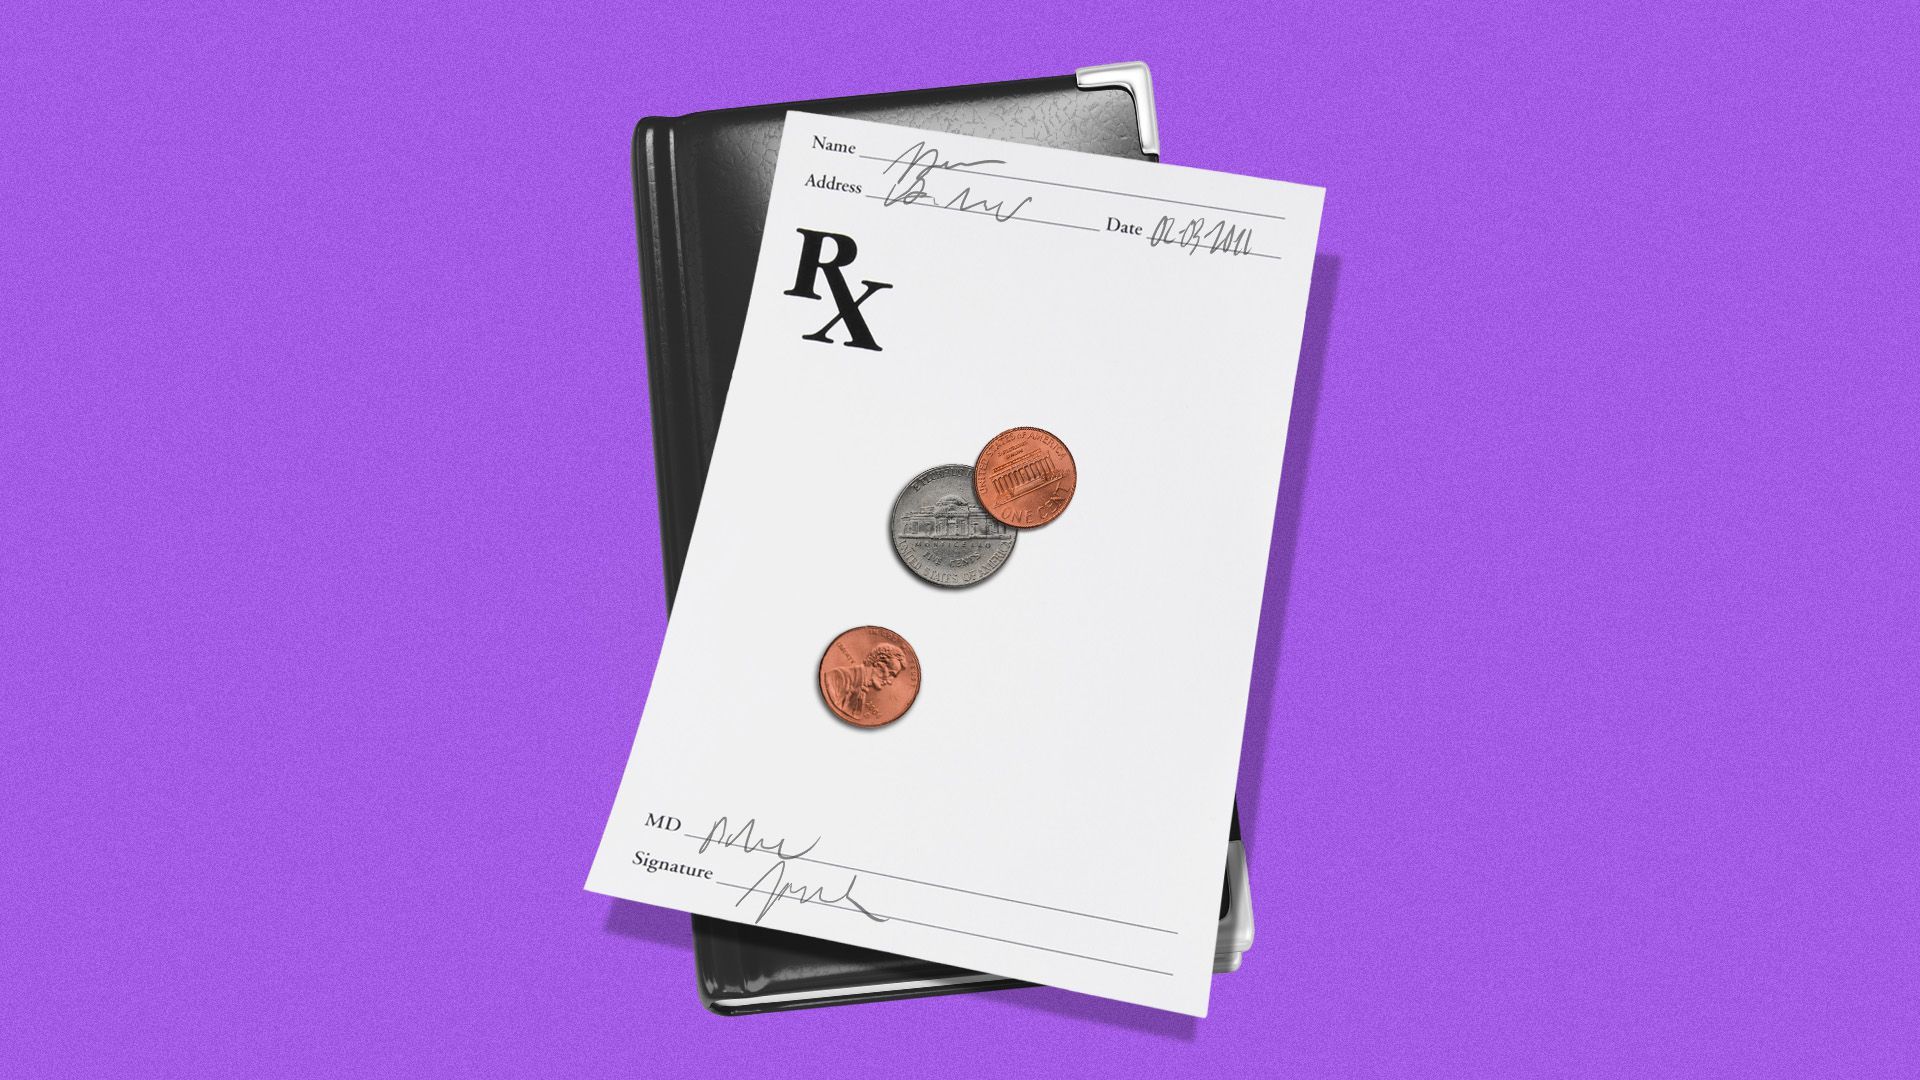 Illustration of a pharmacy script presented as a bill with change on it